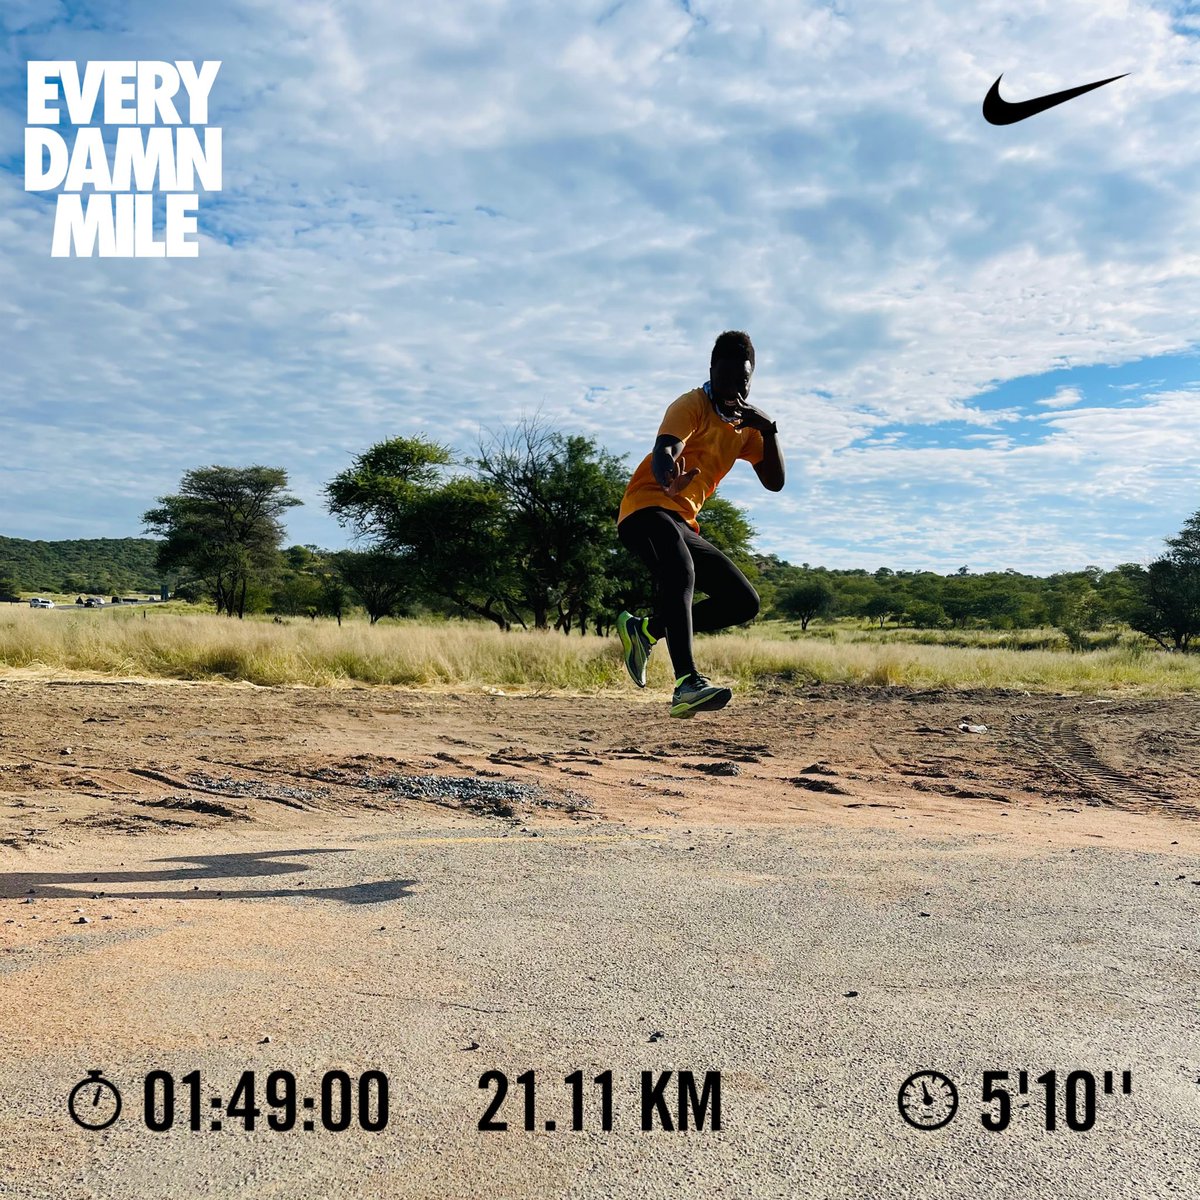 21.1 km PR with a time of 1hr48m:33s

Now back to recovery and planning how to improve my speed and endurance. 

#RunningWithTumiSole 
#nikerunclub
#teamfitness